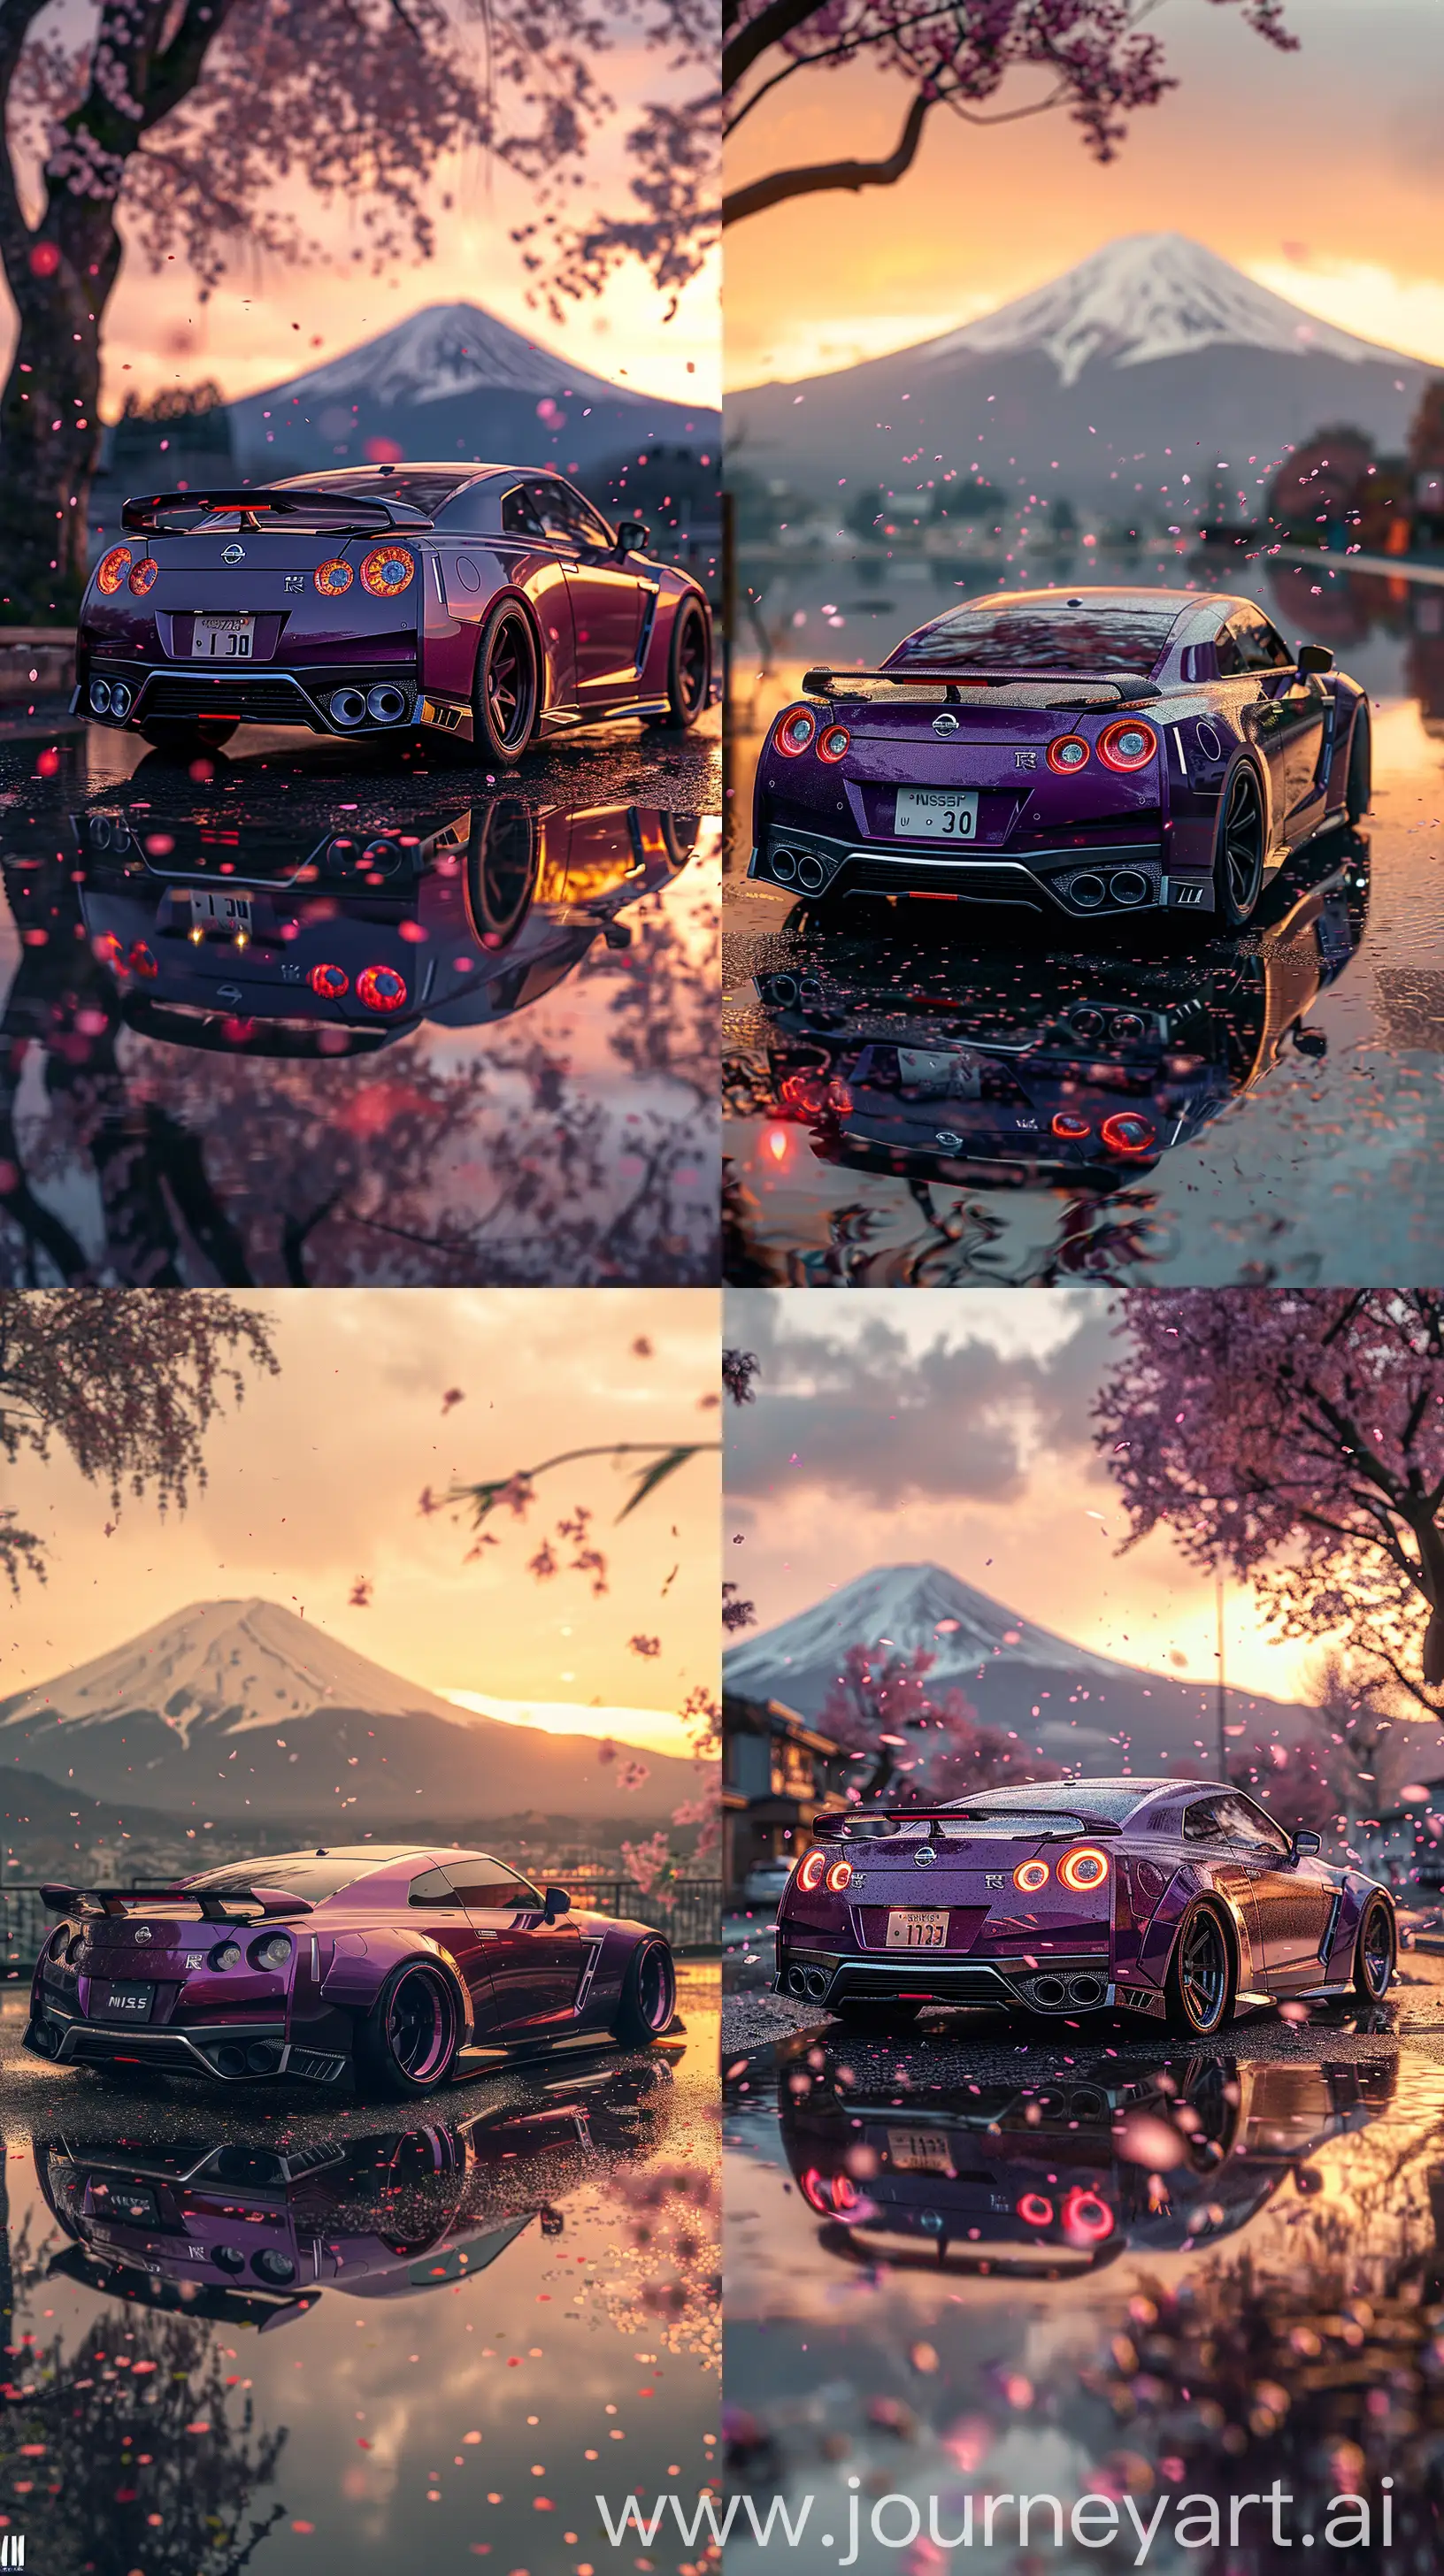 Hyperrealistic-Purple-Nissan-GTR-with-Mount-Fuji-Sunset-View